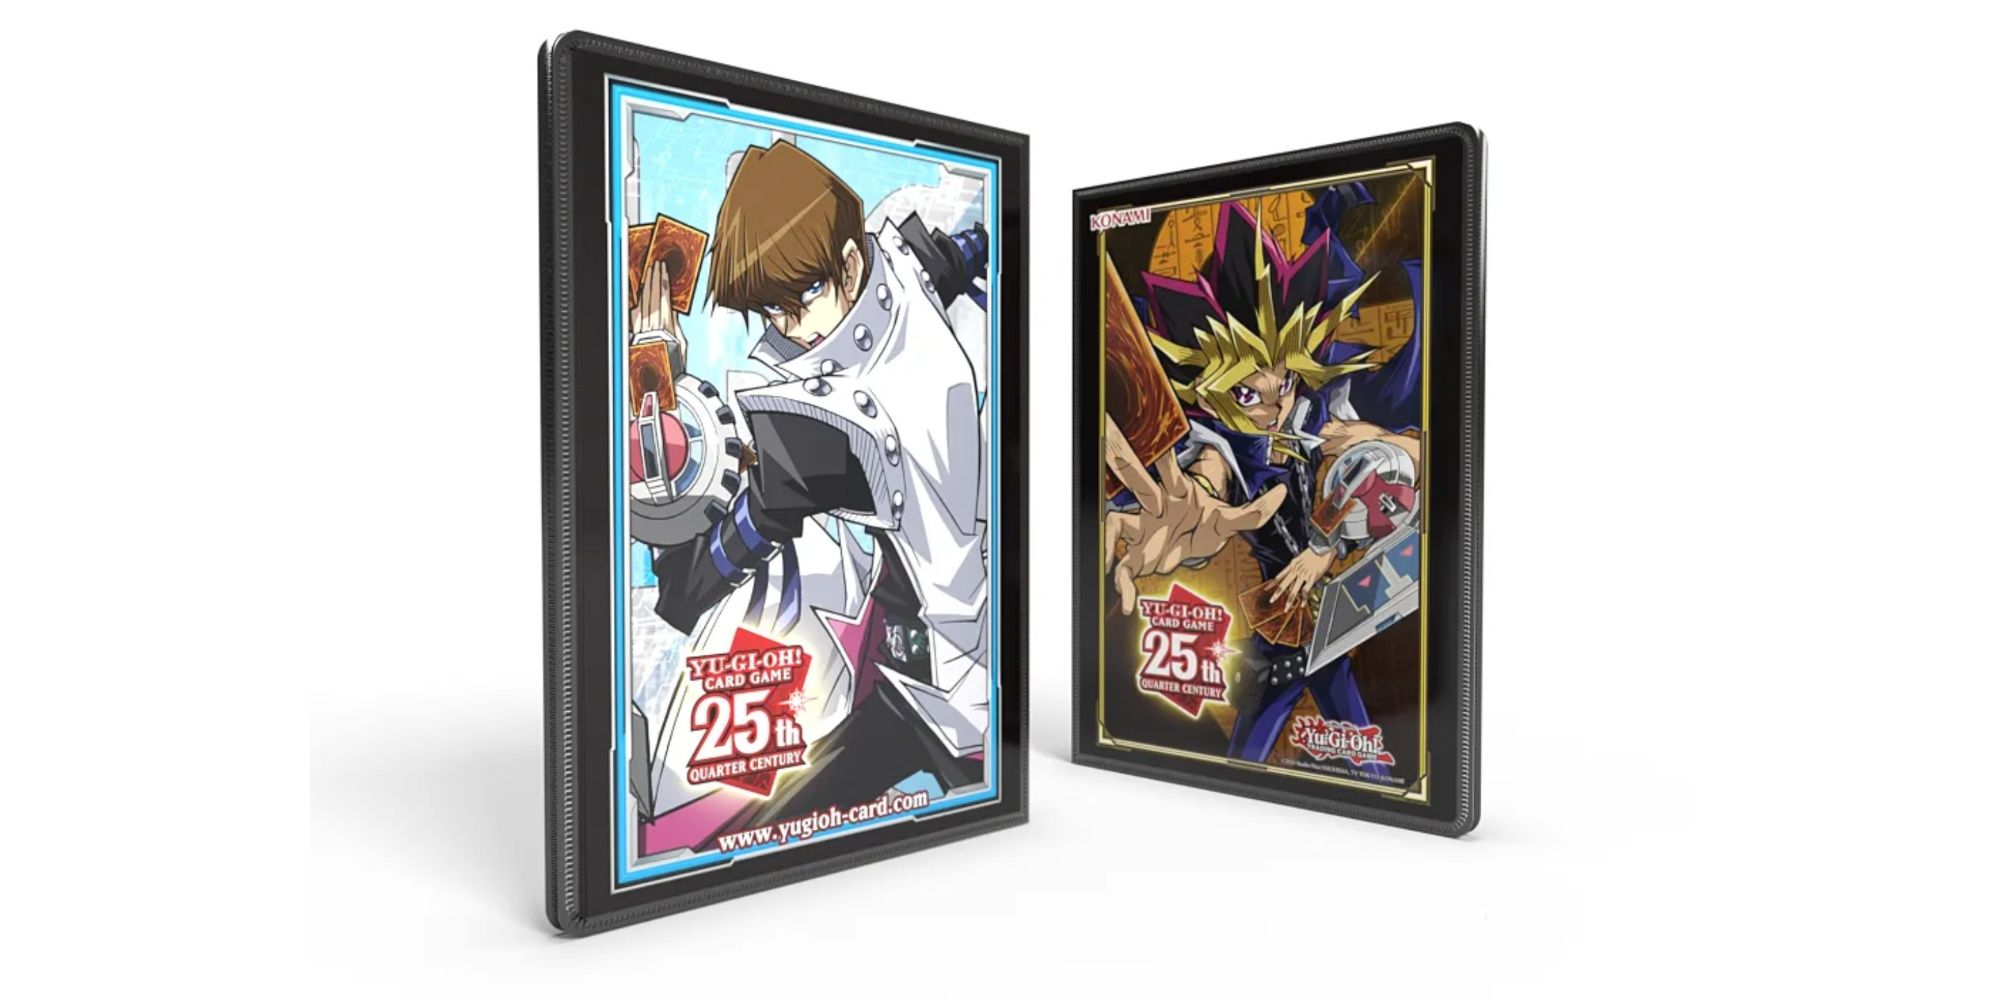 Yu-Gi-Oh's Yugi & Kaiba Quarter Century Accessories Are Available Now